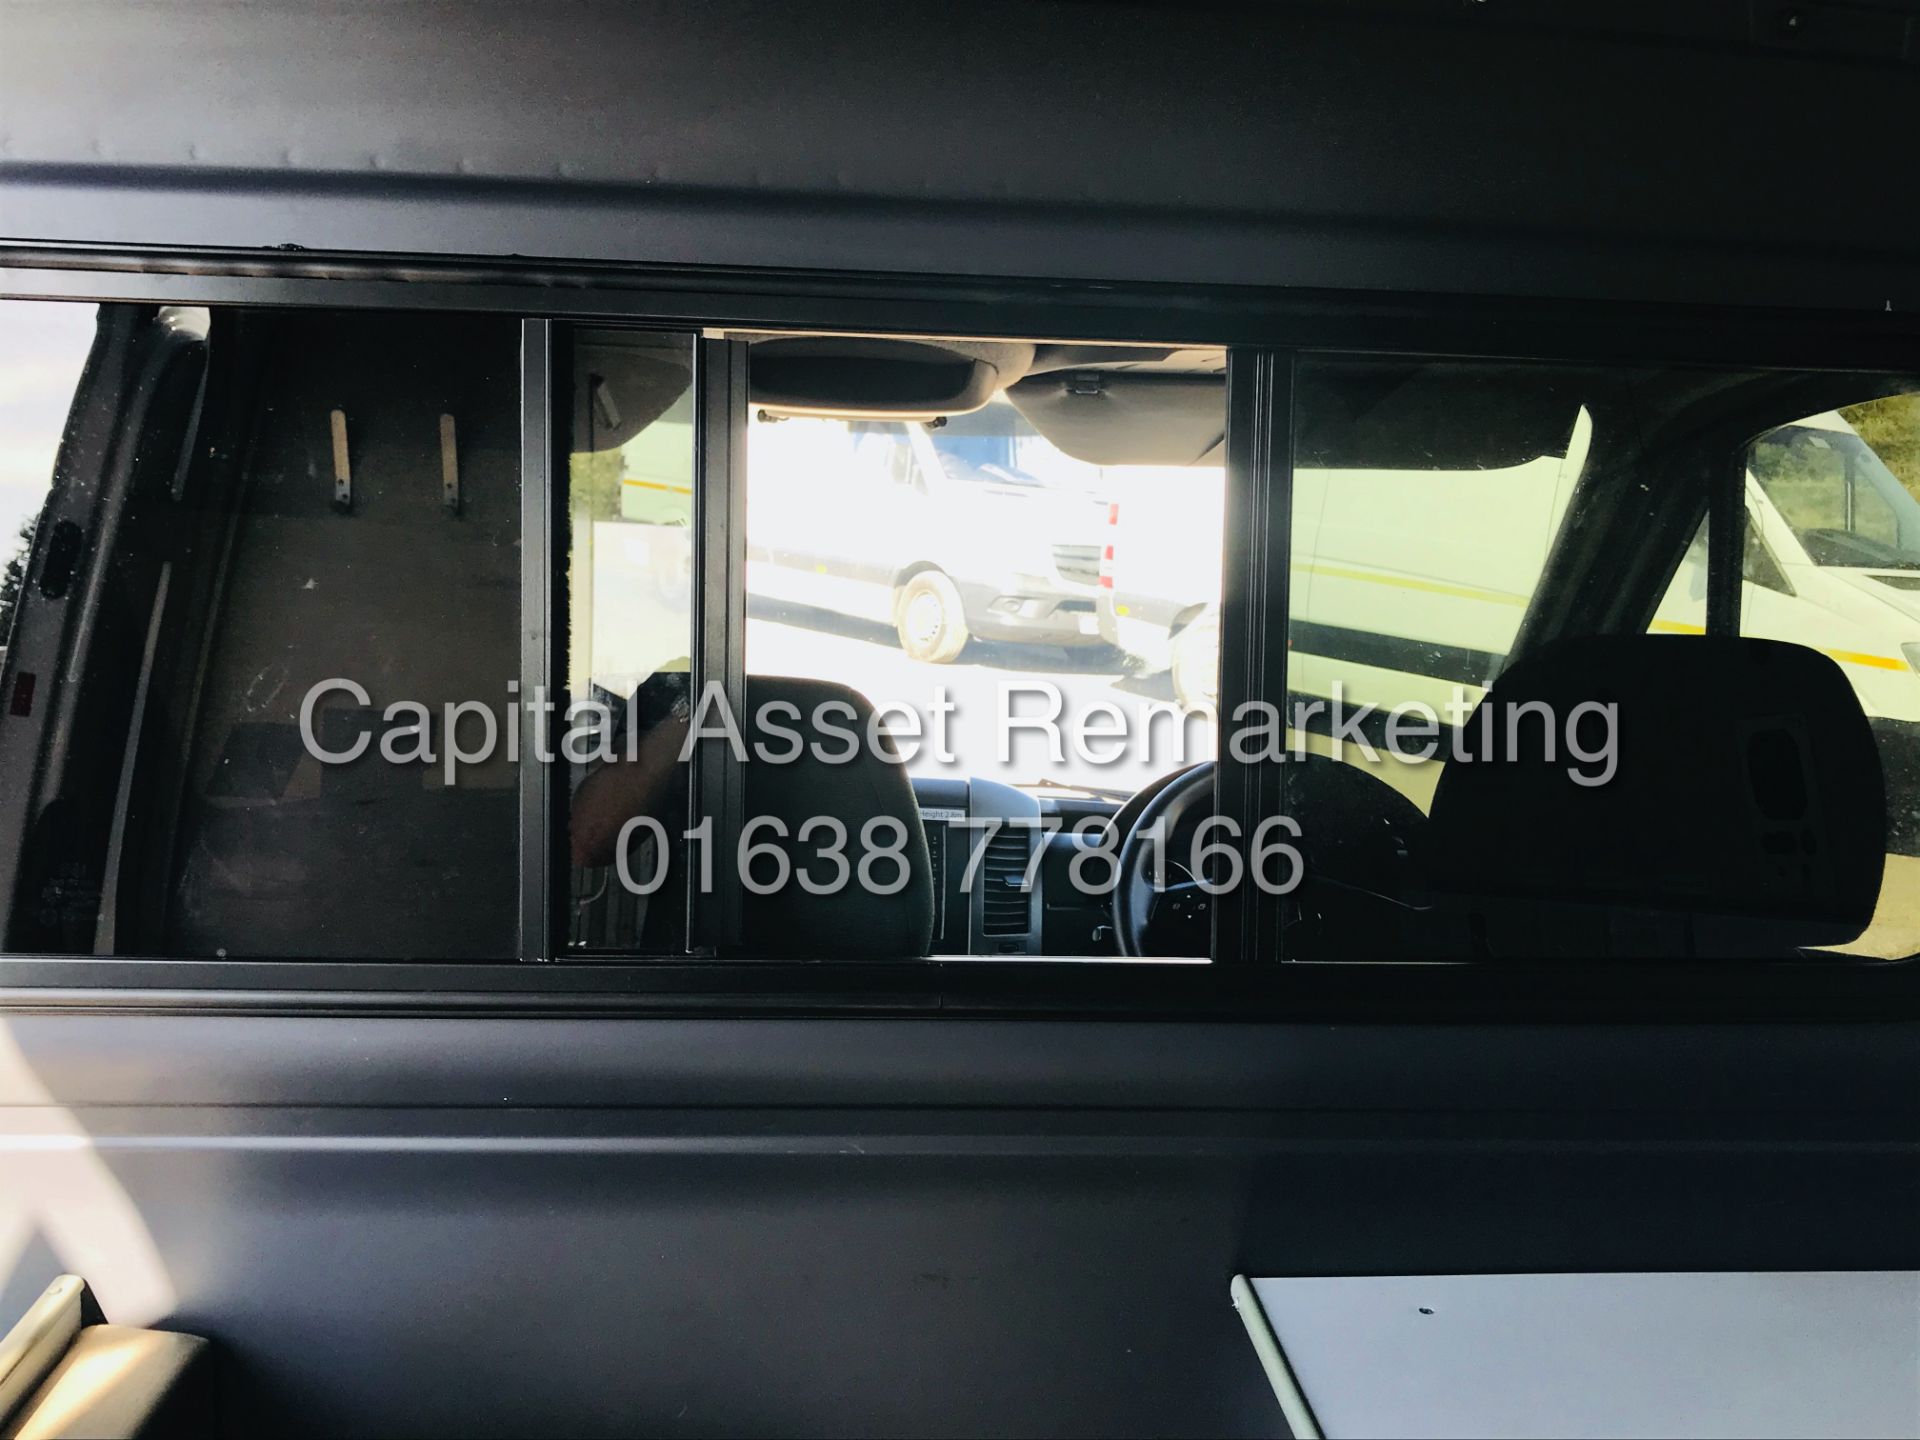 (ON SALE) MERCEDES SPRINTER 313CDI "FULLY FITTED CCTV DRAINAGE VAN" 1 OWNER FSH (15 REG) - Image 33 of 38